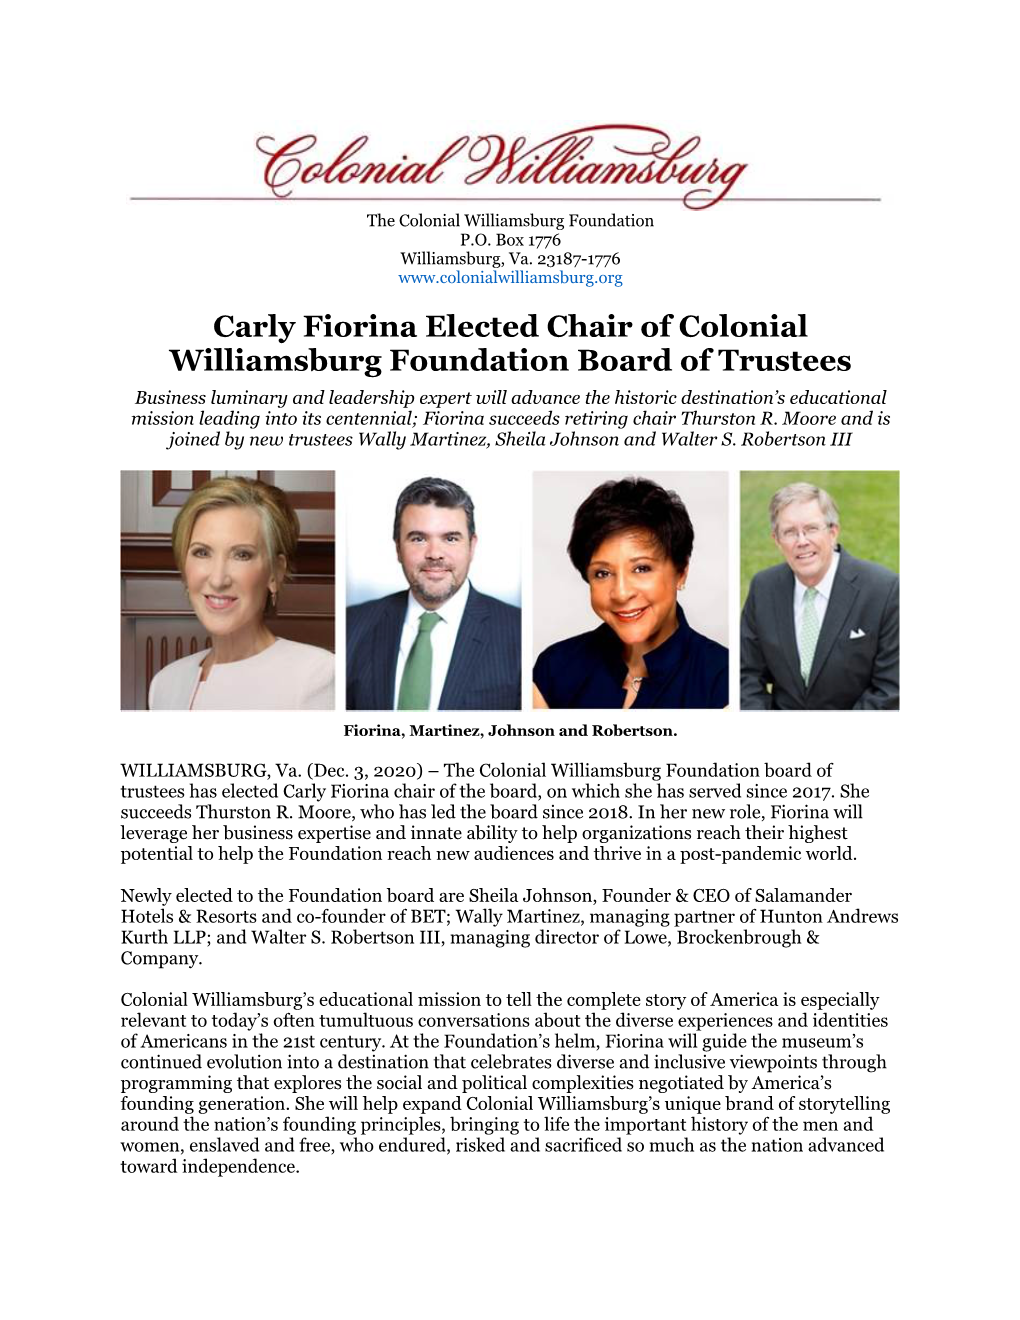 Carly Fiorina Elected Chair of Colonial Williamsburg Foundation Board Of